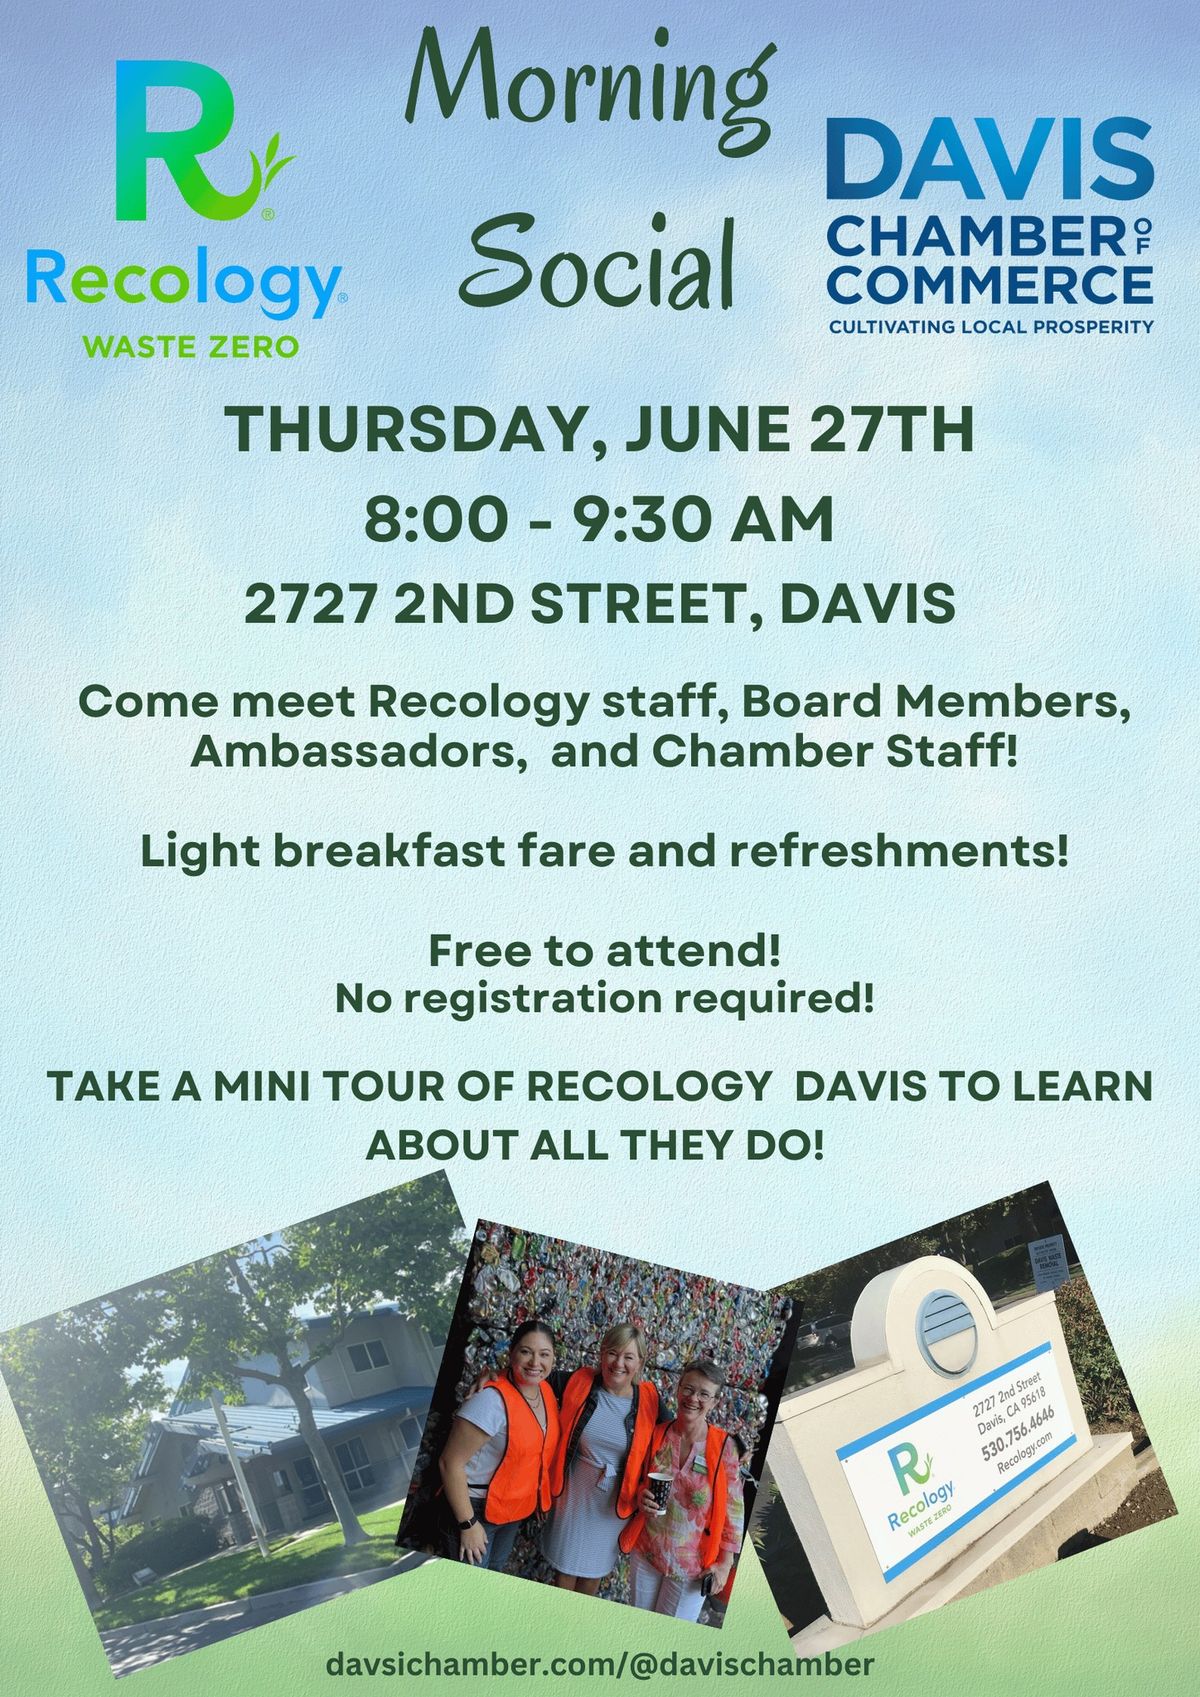 Morning Social with Recology Davis